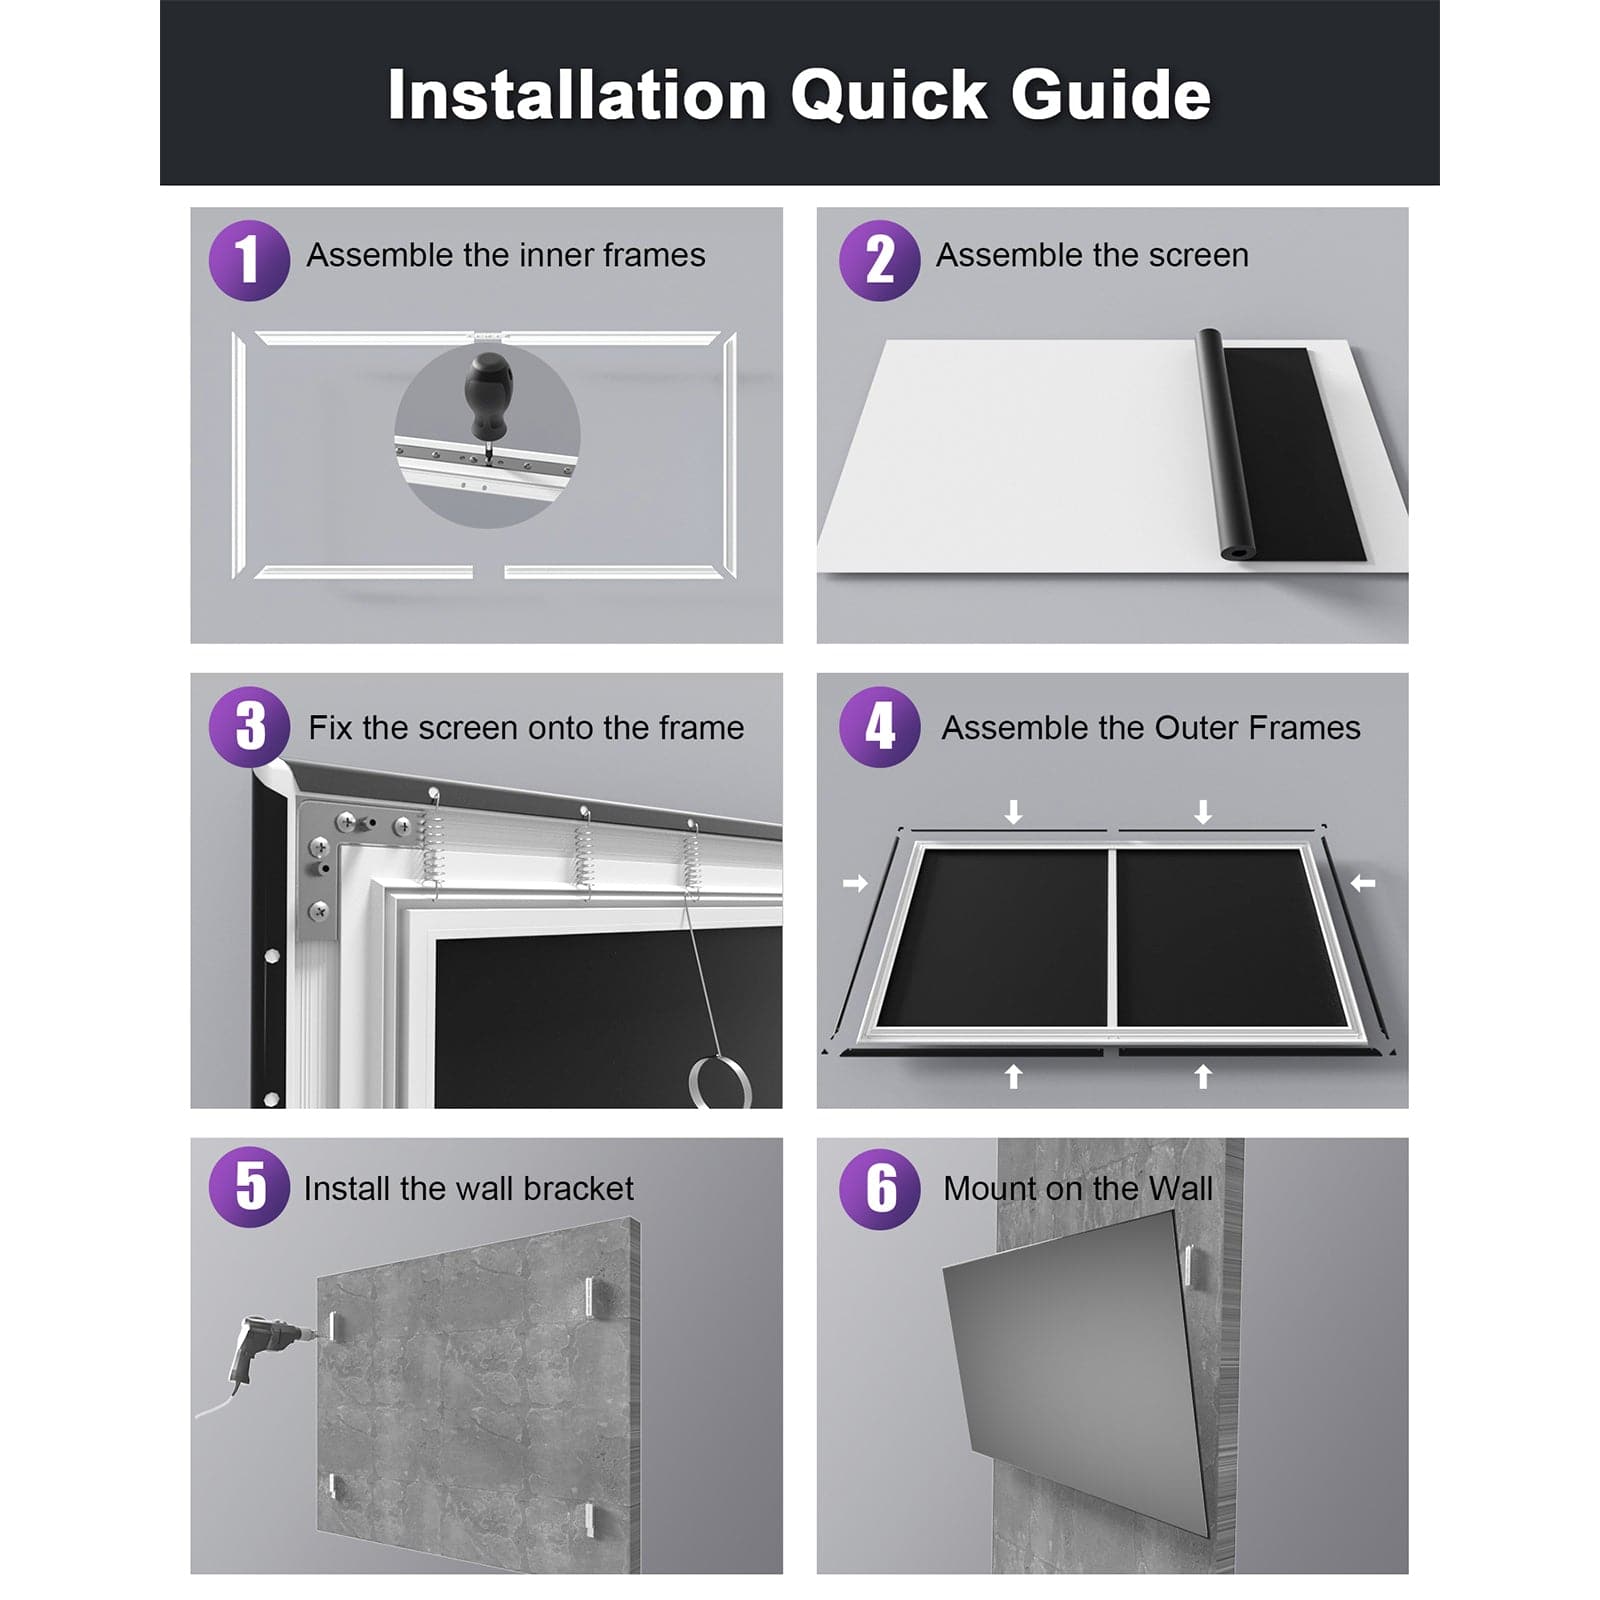 Step-by-step installation quick guide for AWOL Vision projector screen, illustrating frame assembly and wall mounting process.